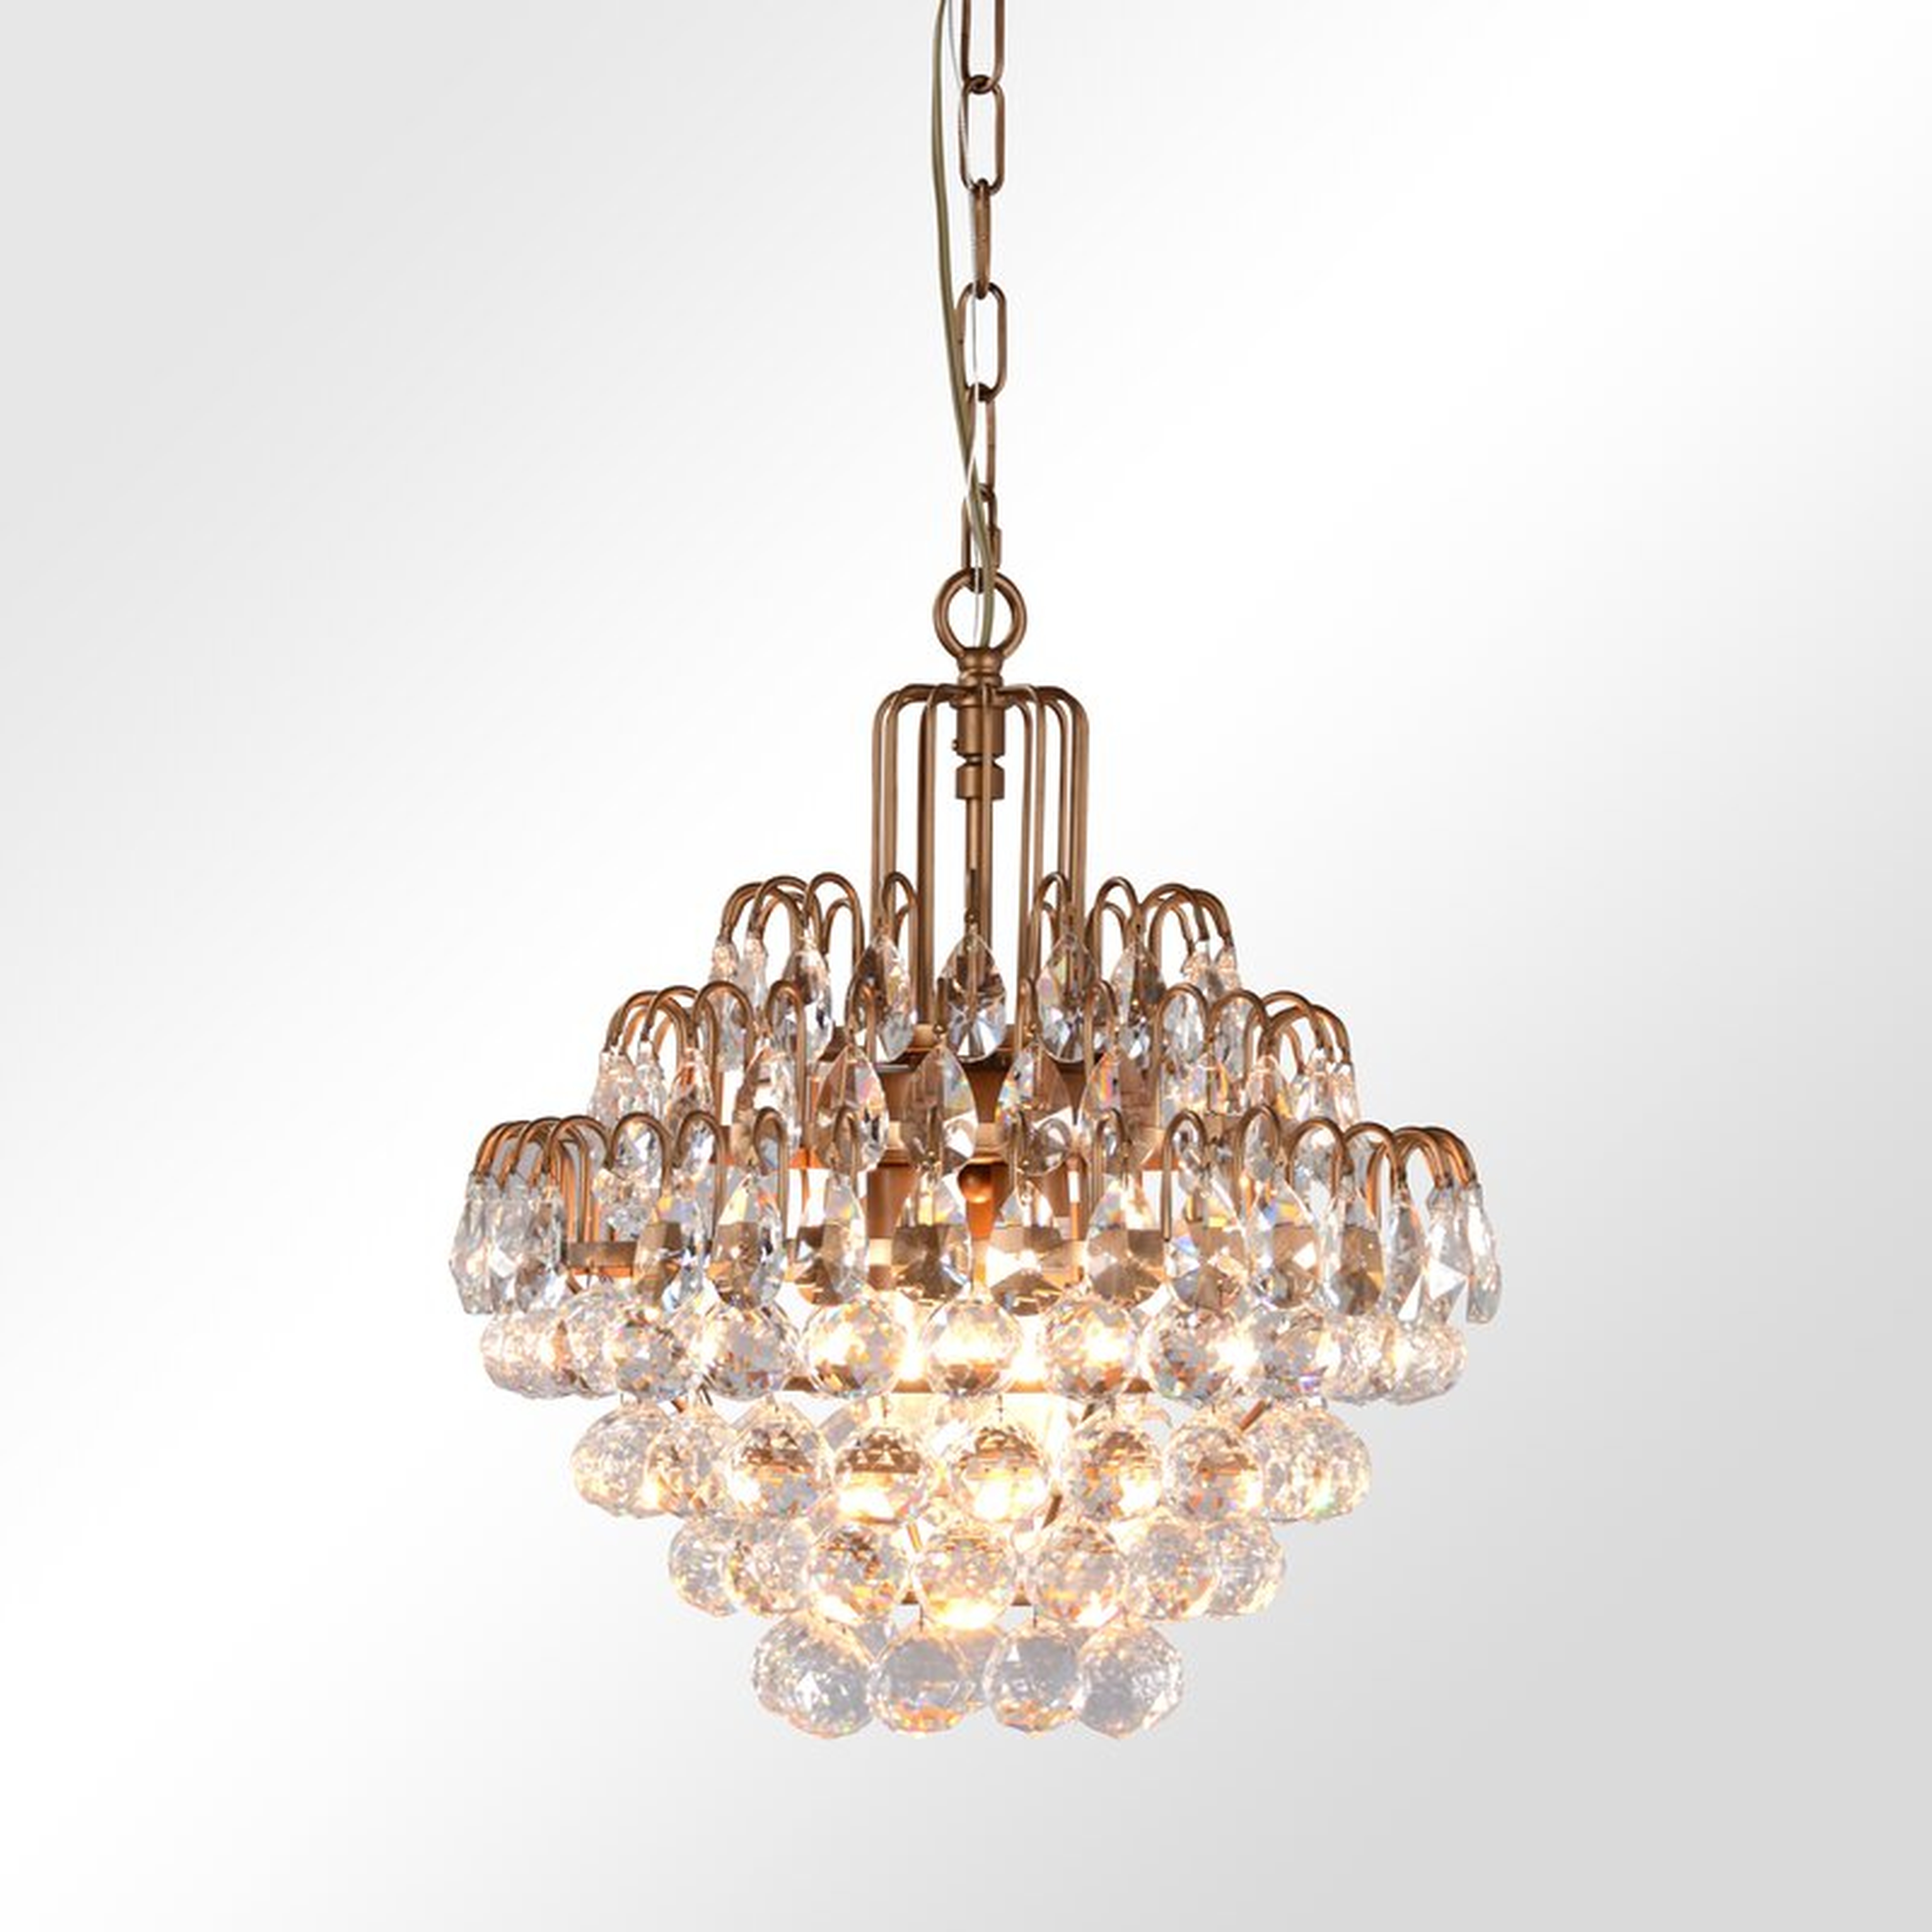 Thayer 3 - Light Shaded Tiered Chandelier - Perigold